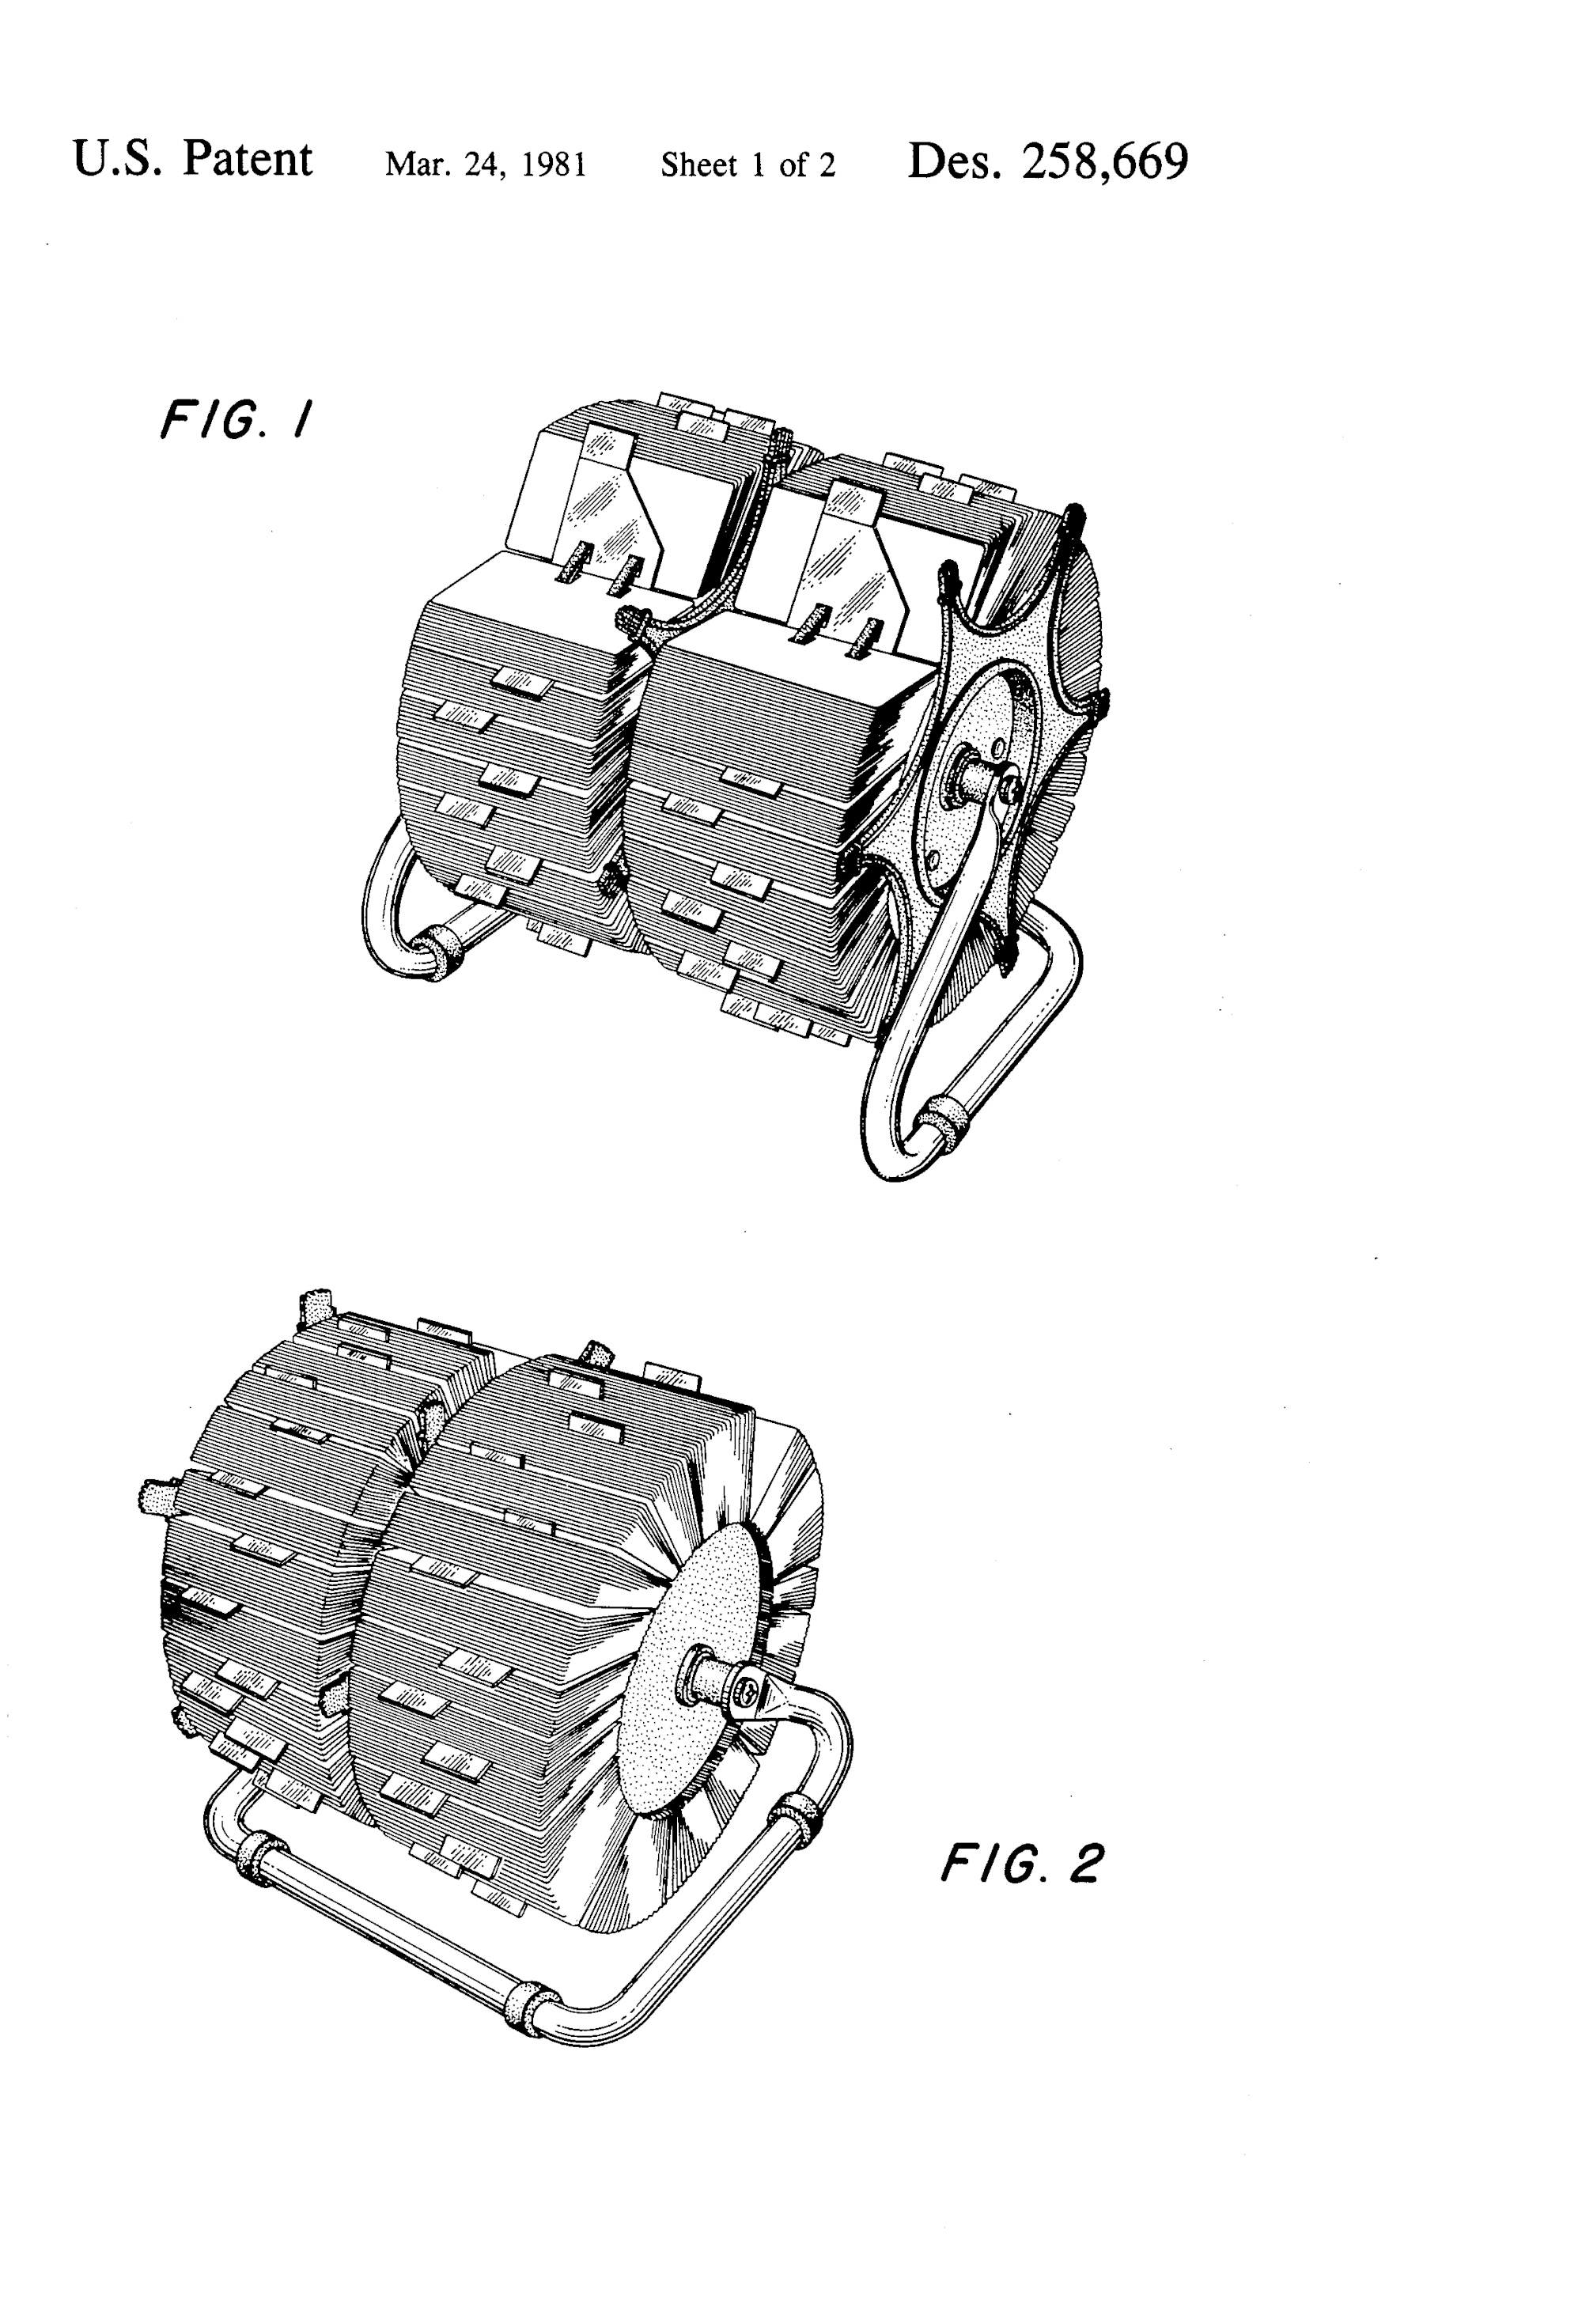 Rotary Card File, Hildaur L. Nielsen, for Rolodex Corporation, 1977/1981. Patent Number: USD 258,669, U.S. Patent Office